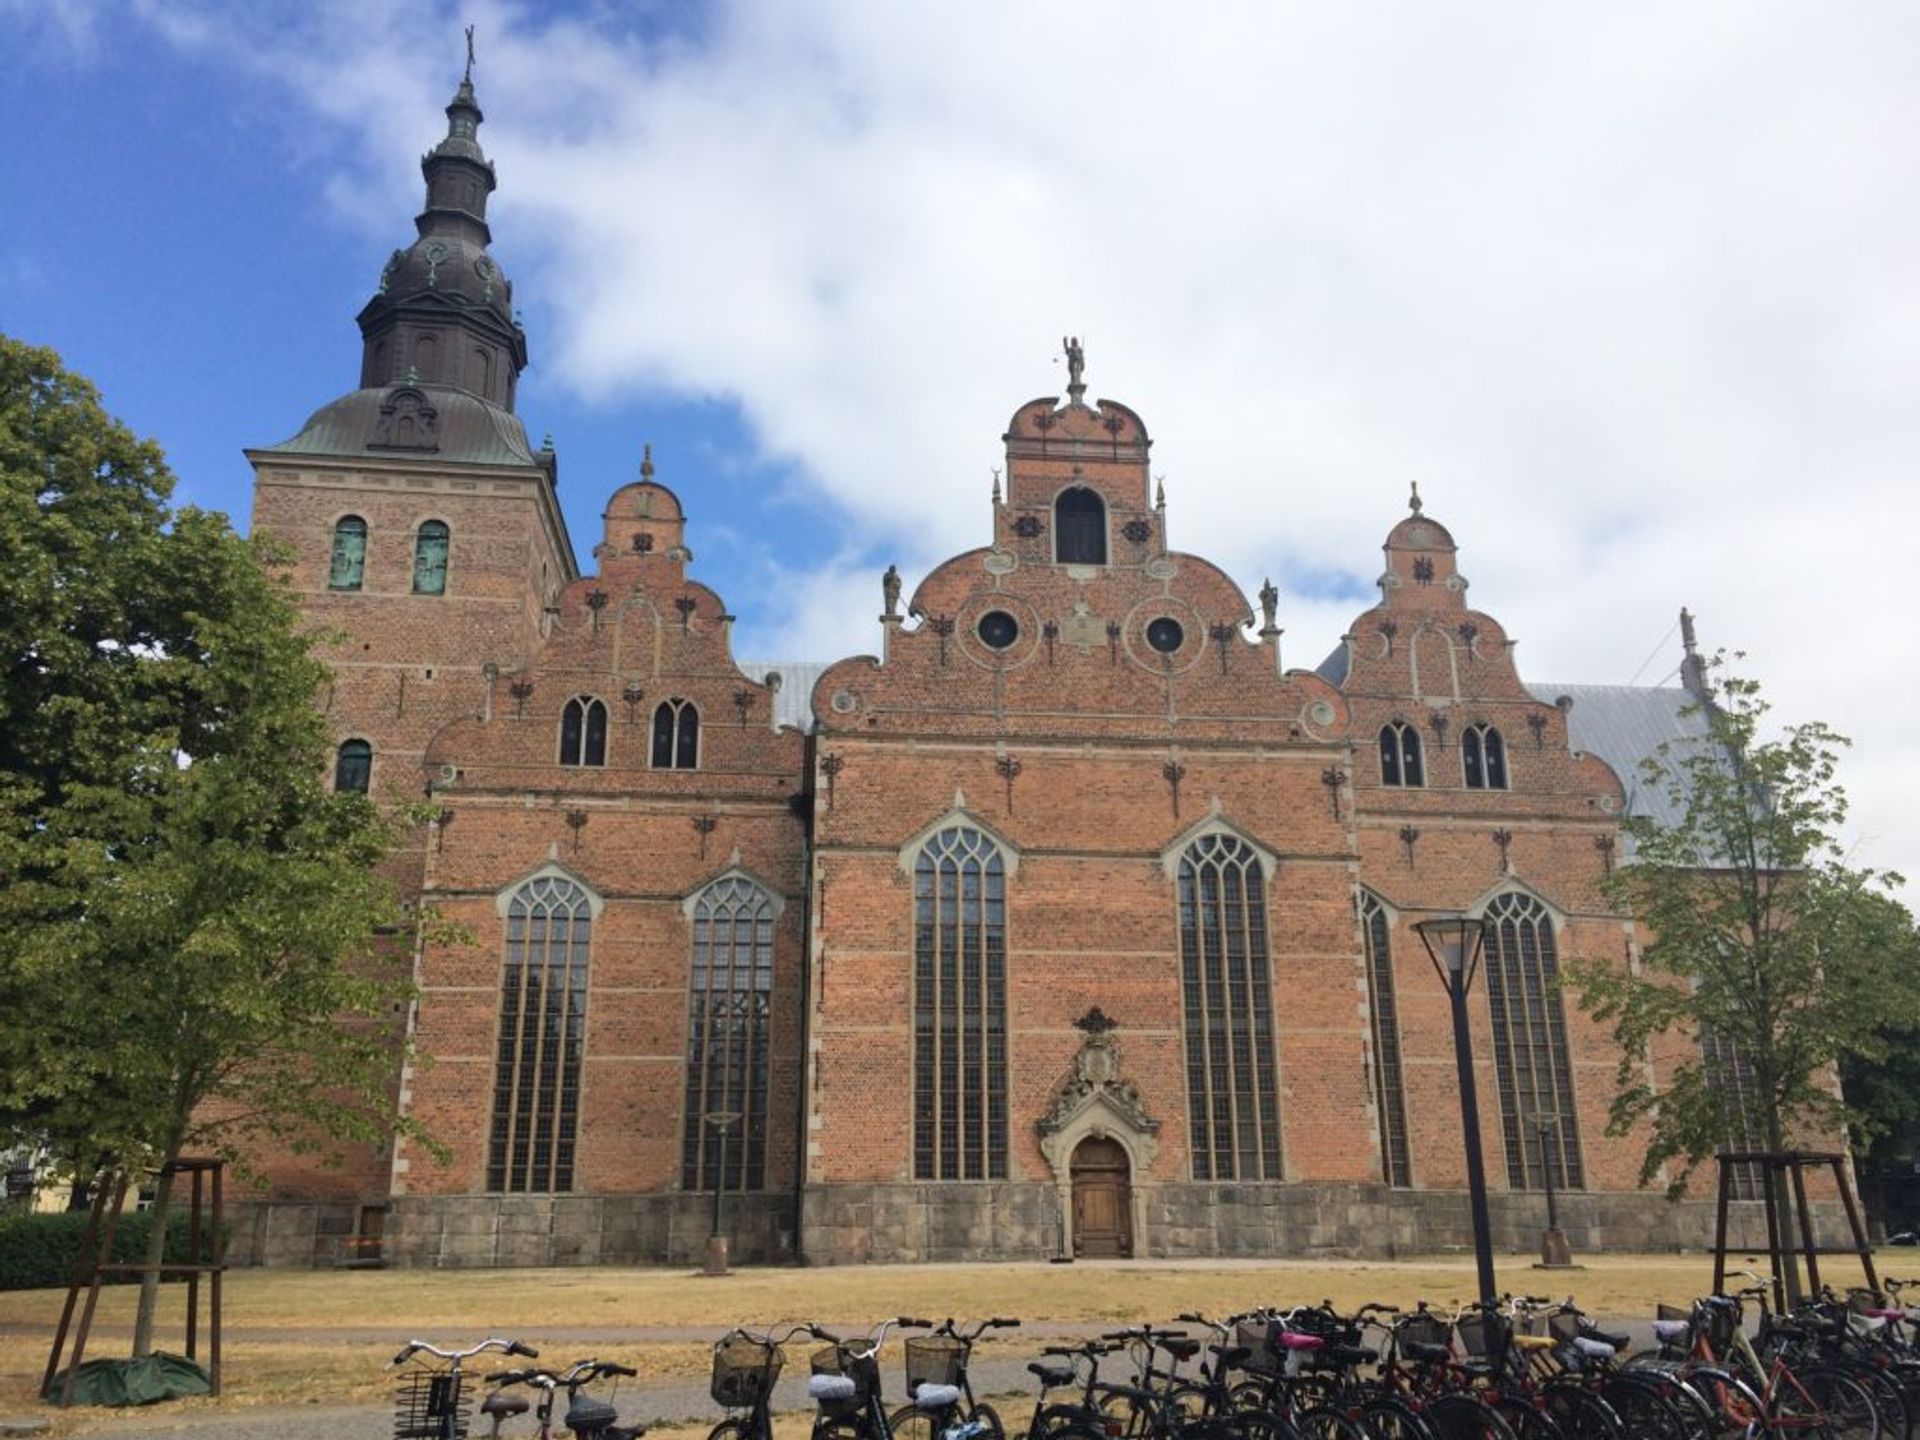 A Baroque-style brick cathedral.